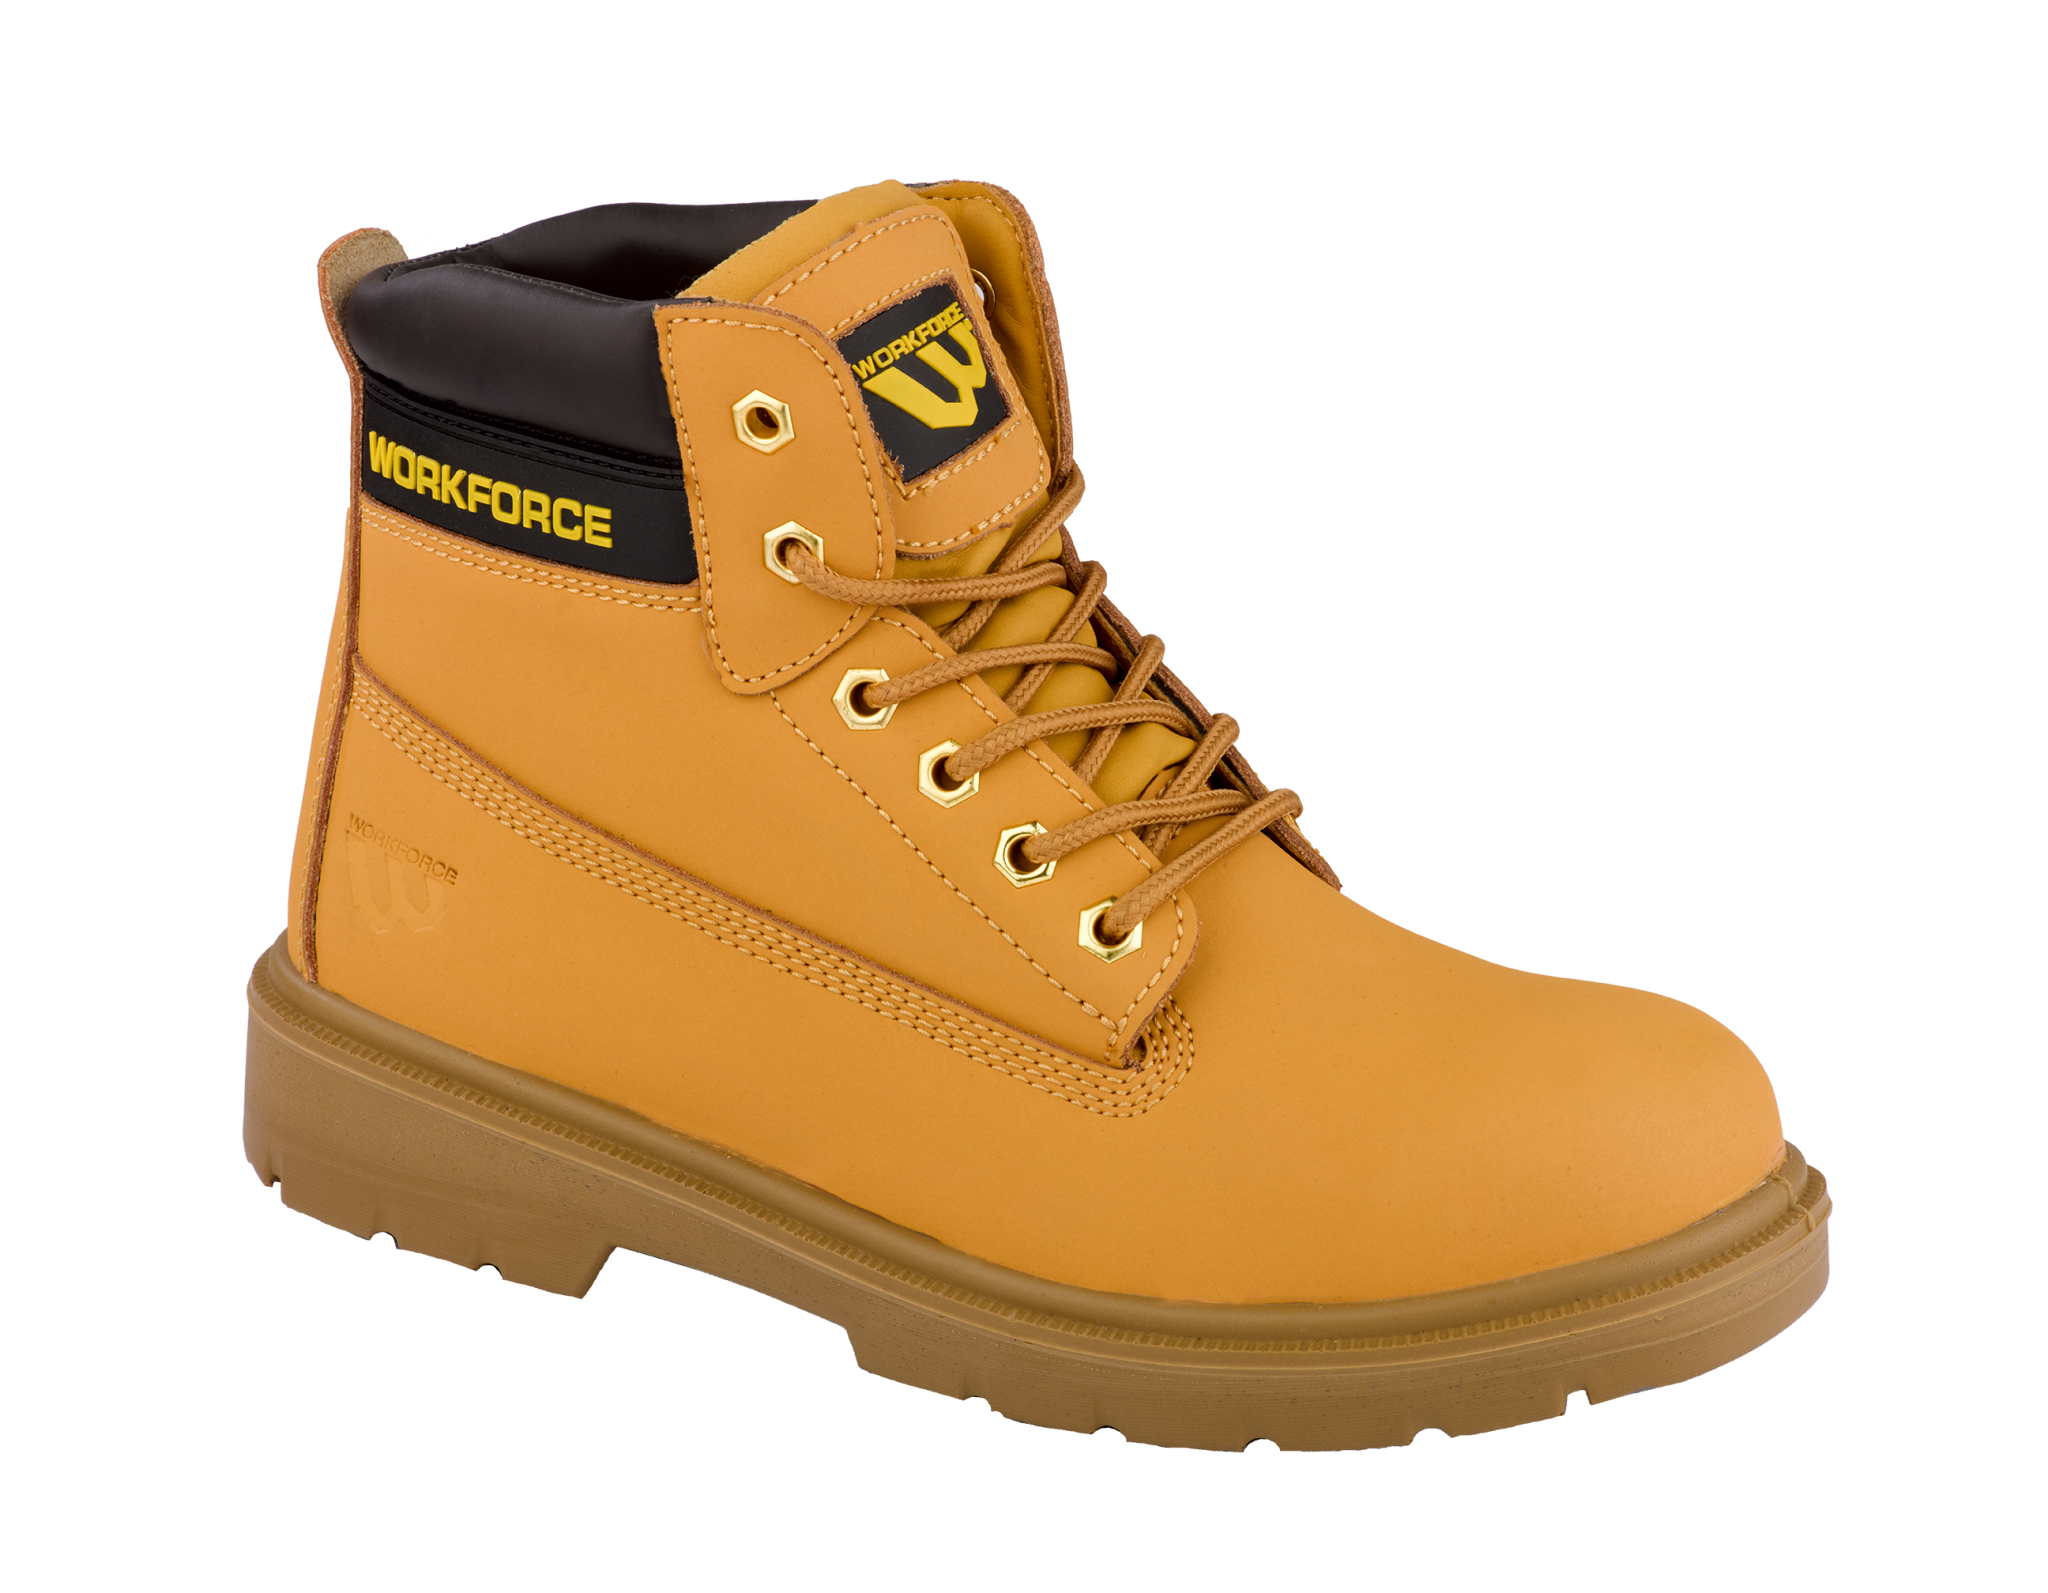 WORKFORCE HONEY LEATHER BOOT S1P STYLISH & PROTECTIVE FOOTWEAR (WF301)